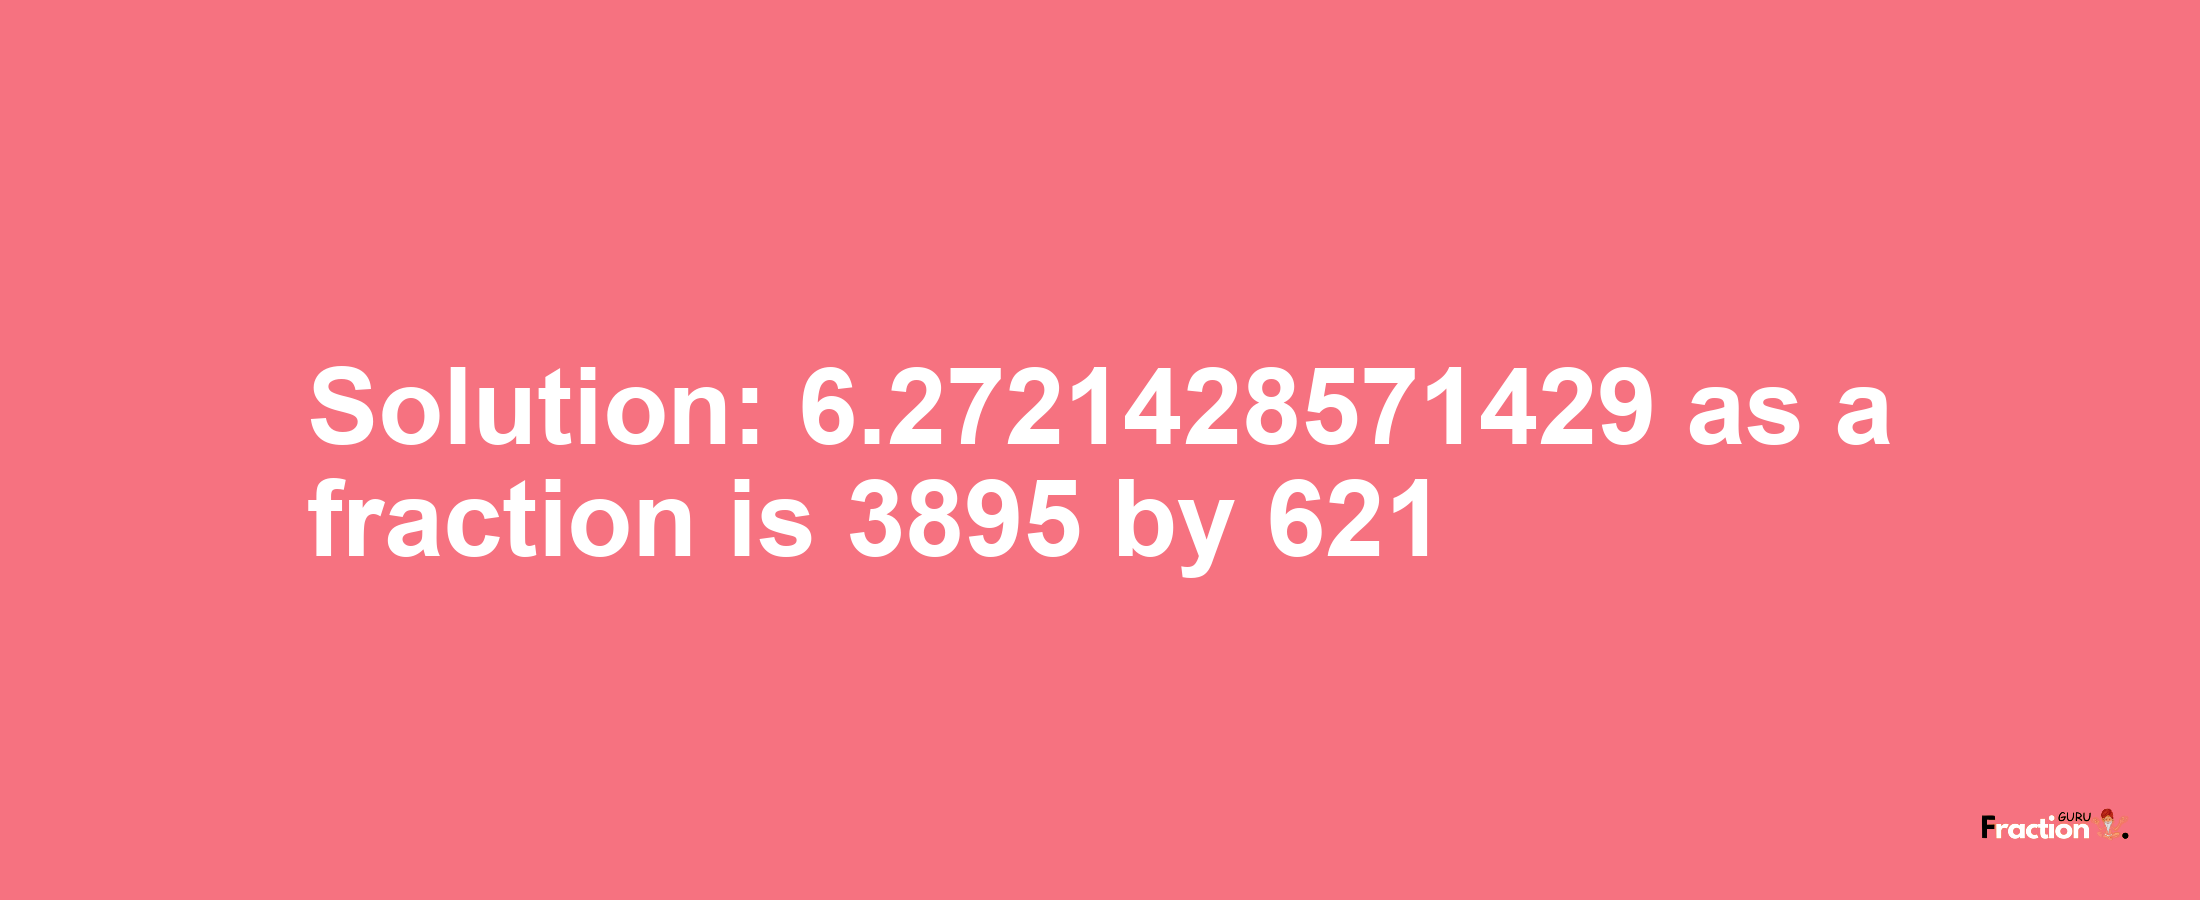 Solution:6.2721428571429 as a fraction is 3895/621